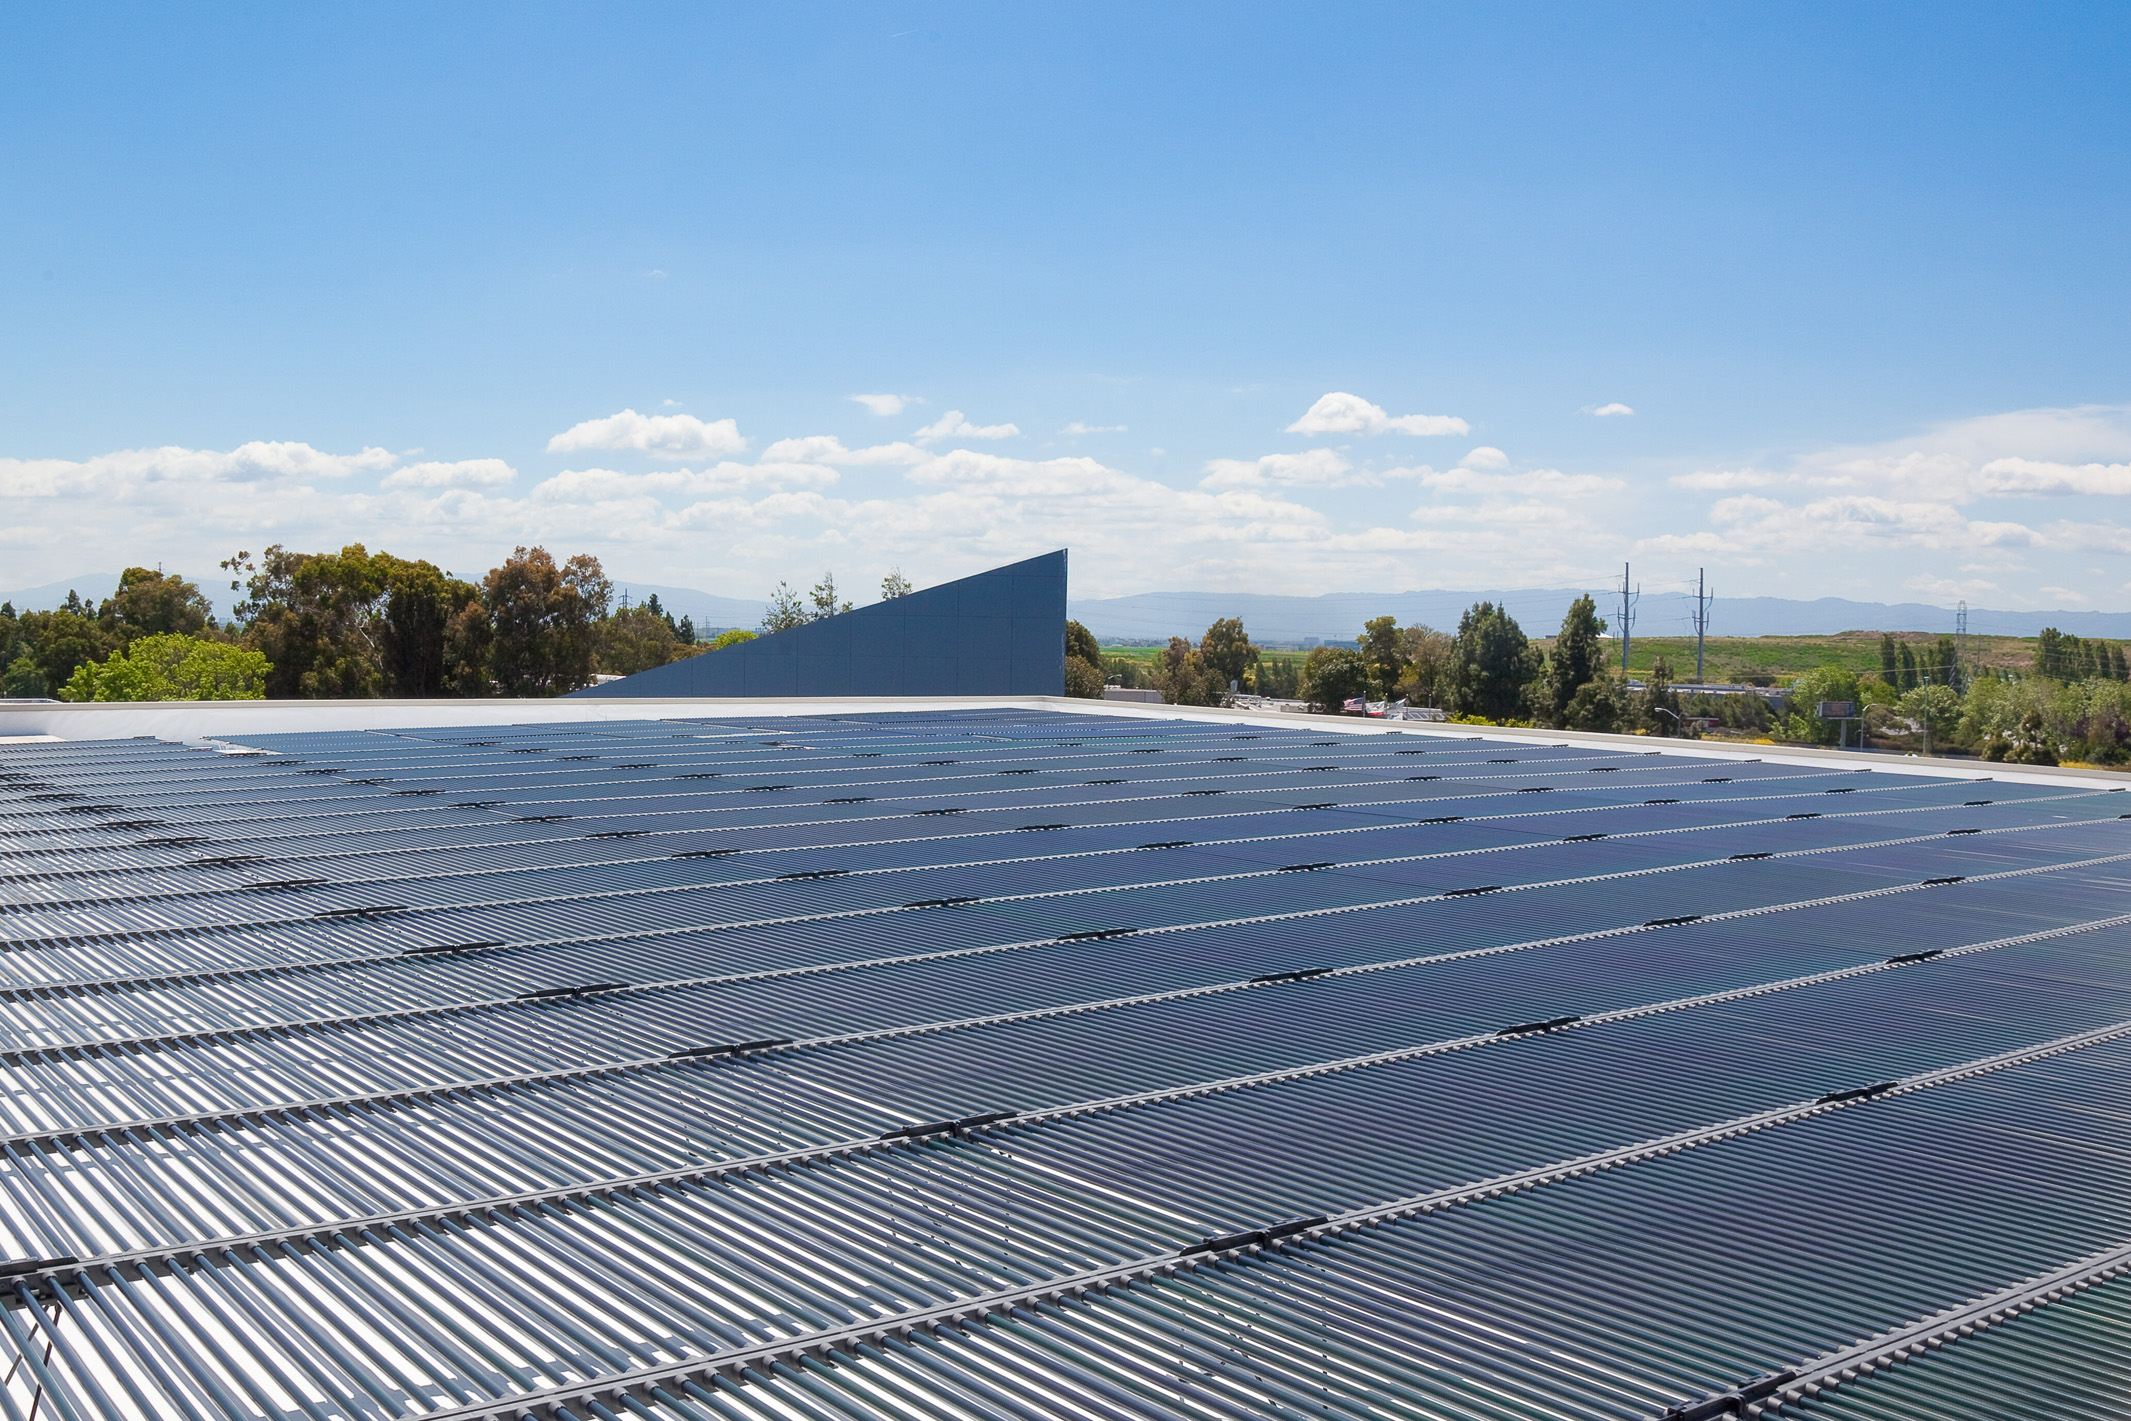 Solyndra Announces the Fastest and Easiest-to-Install Rooftop Solar System